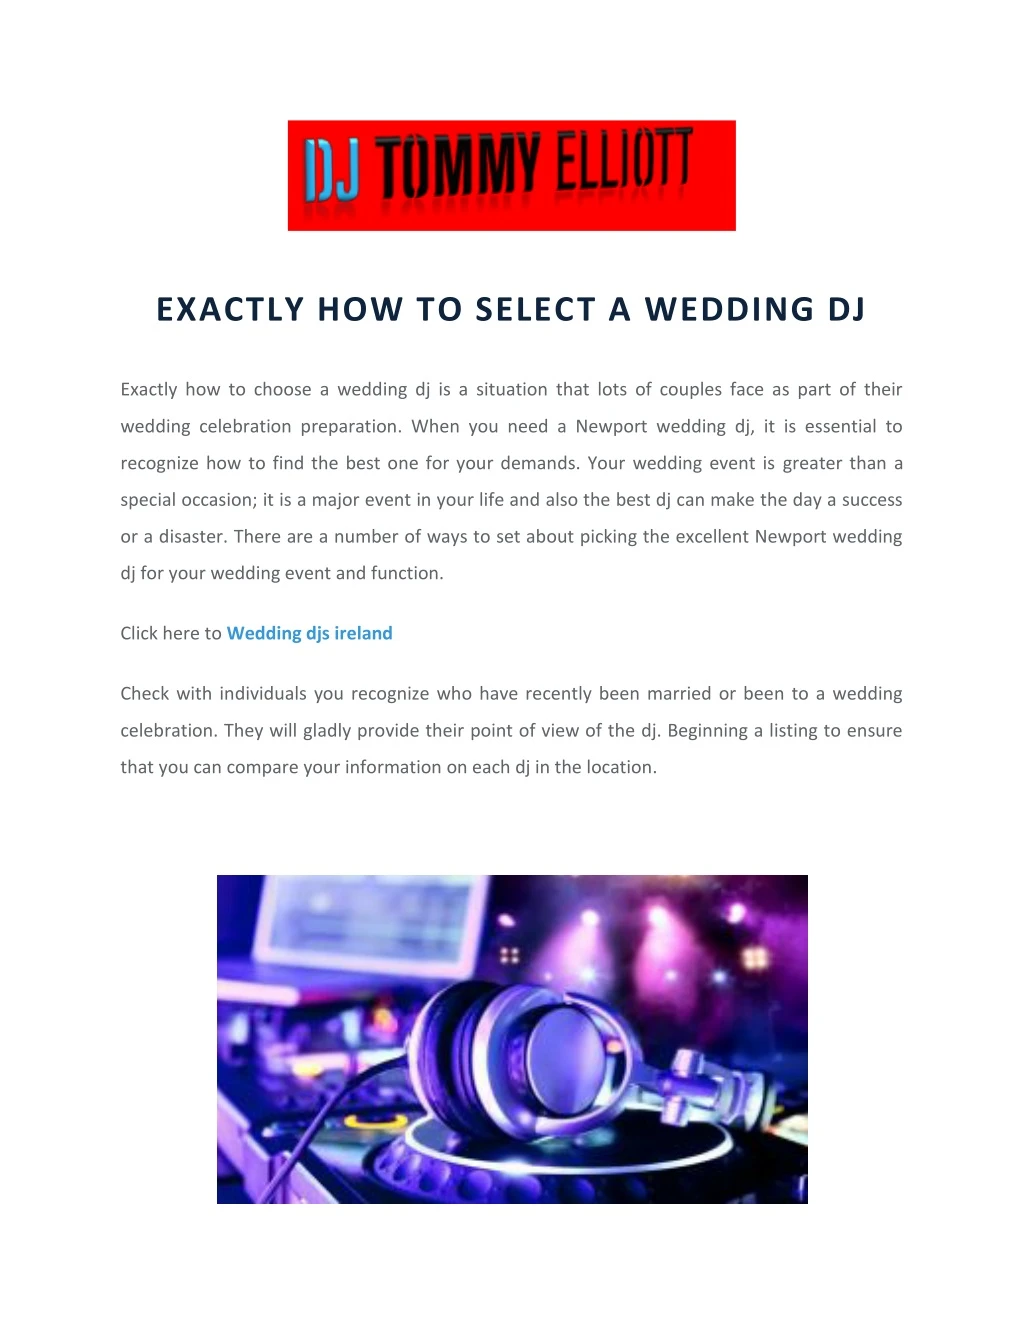 exactly how to select a wedding dj